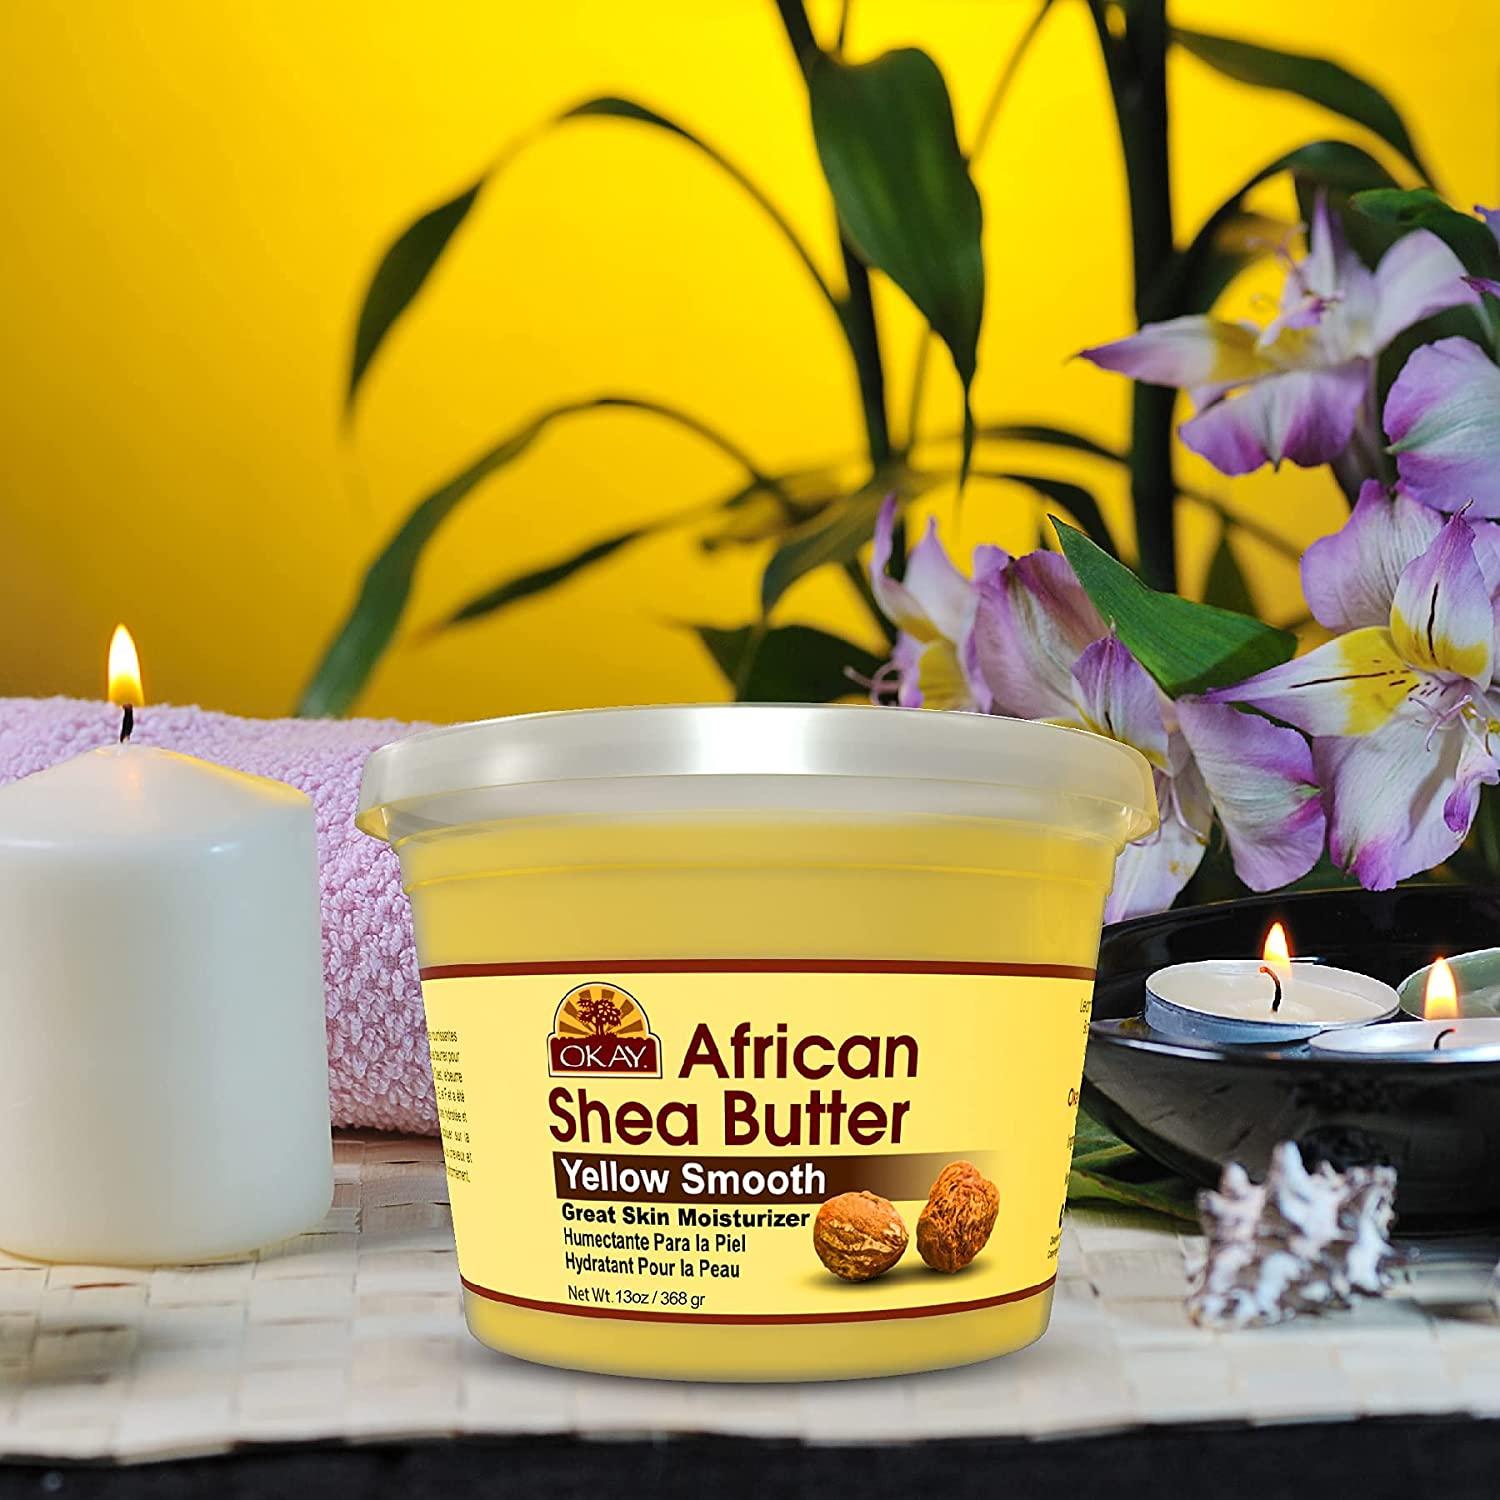 OKAY AFRICAN SHEA BUTTER YELLOW SMOOTH 30oz